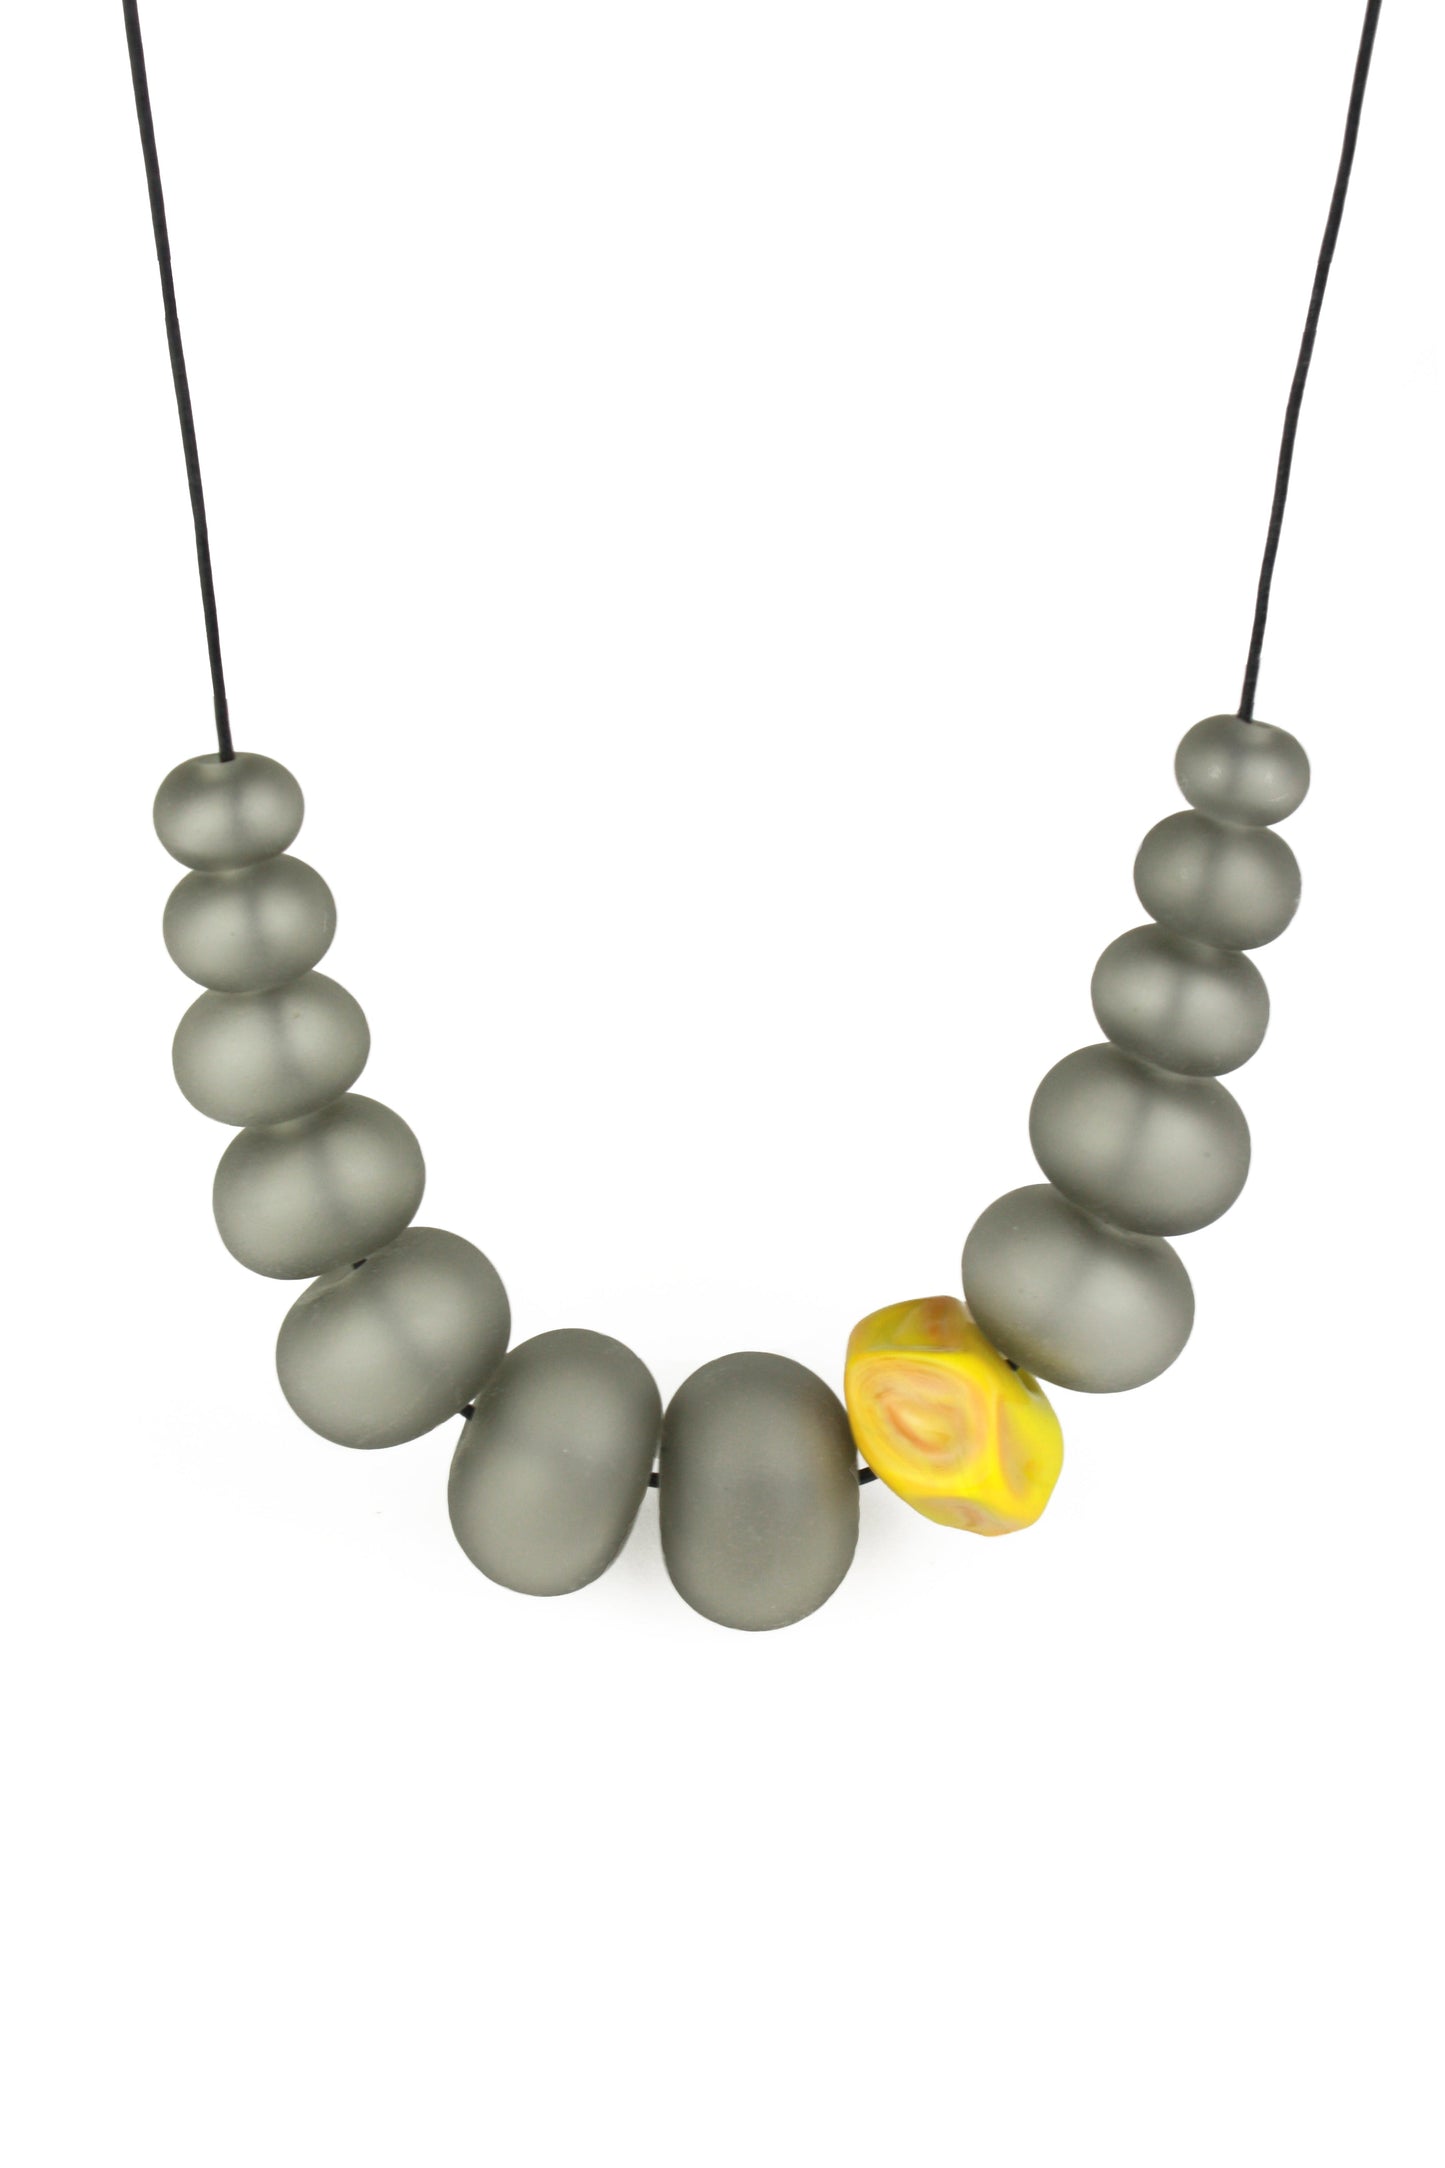 Necklace of hand blown and sandblasted hollow beads in velvety grey glass paired with a ochre yellow glass nugget bead and strung on adjustable leather